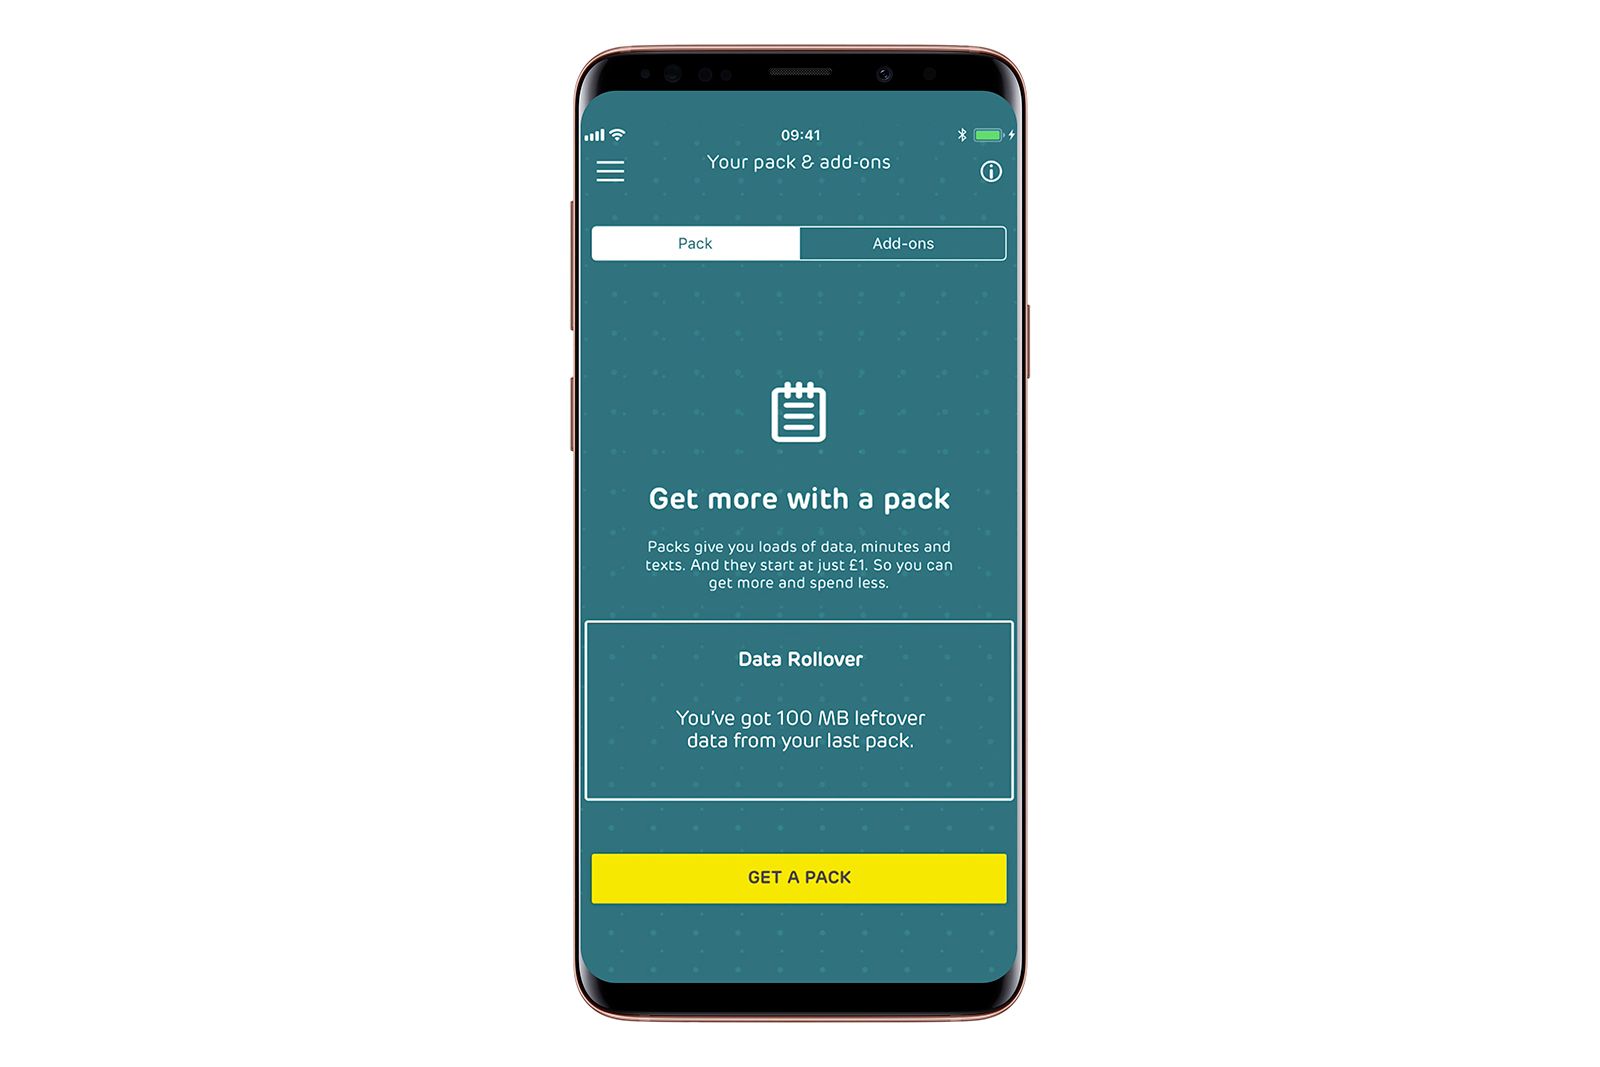 Ee Adds Data Rollover To Its Payg Data And Everything Packs image 2